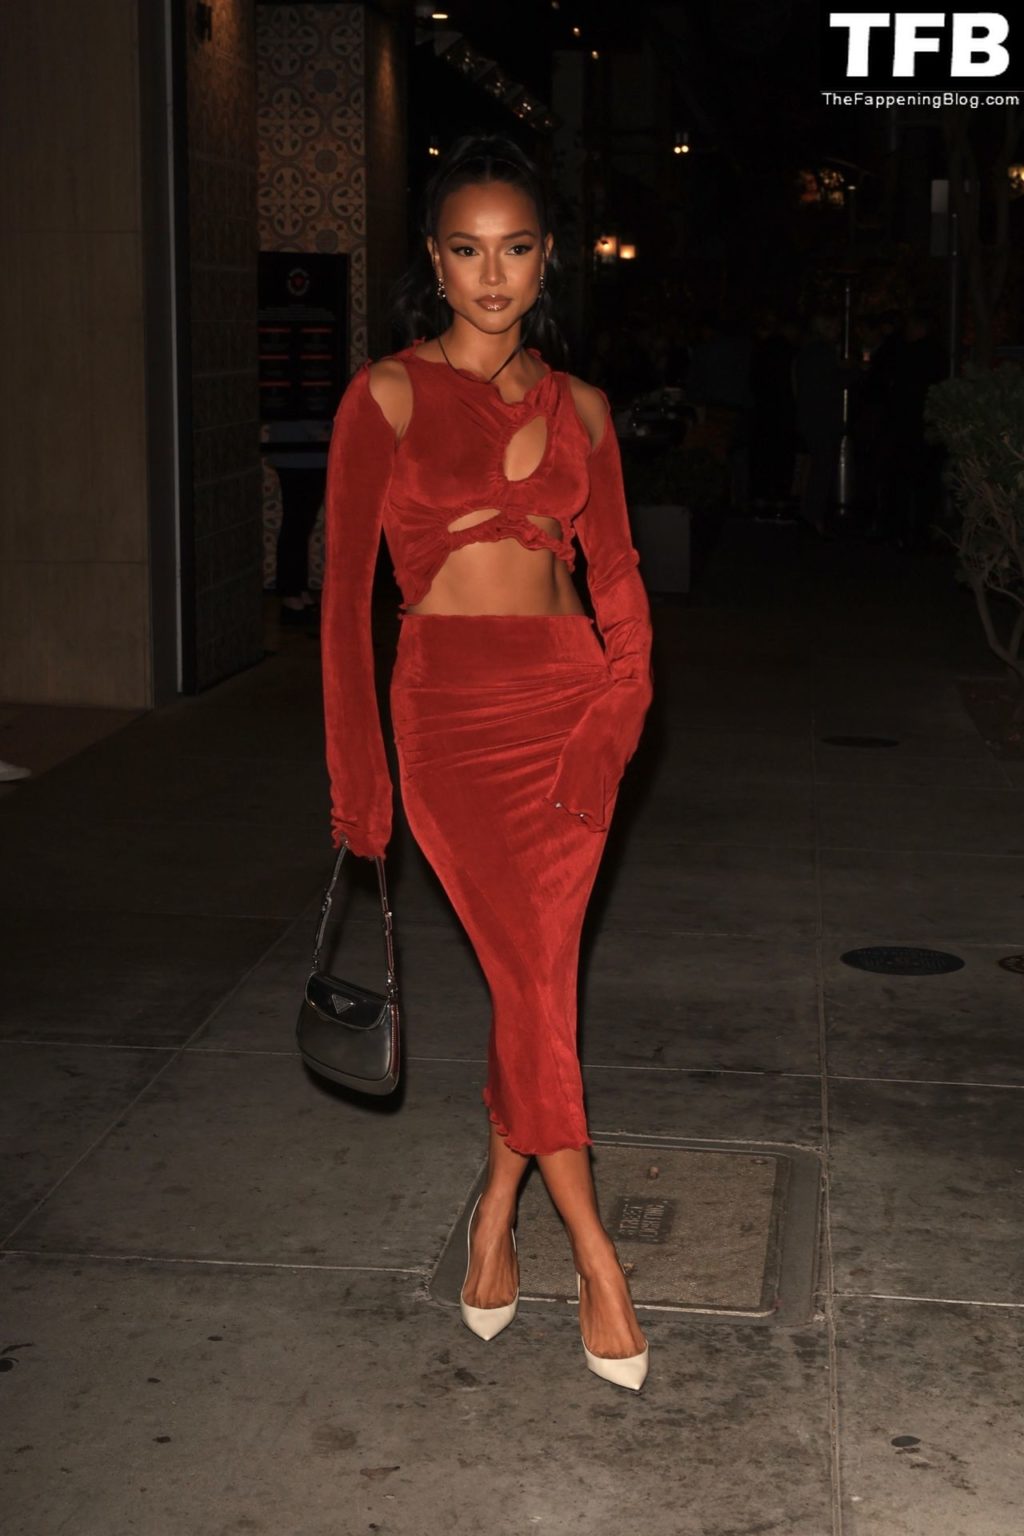 Karrueche Tran Sexy The Fappening Blog 29 1024x1536 - Karrueche Tran Shows Her Pokies in a Red Dress at The Hollywood Reporter’s Oscar Nominees Night (68 Photos)